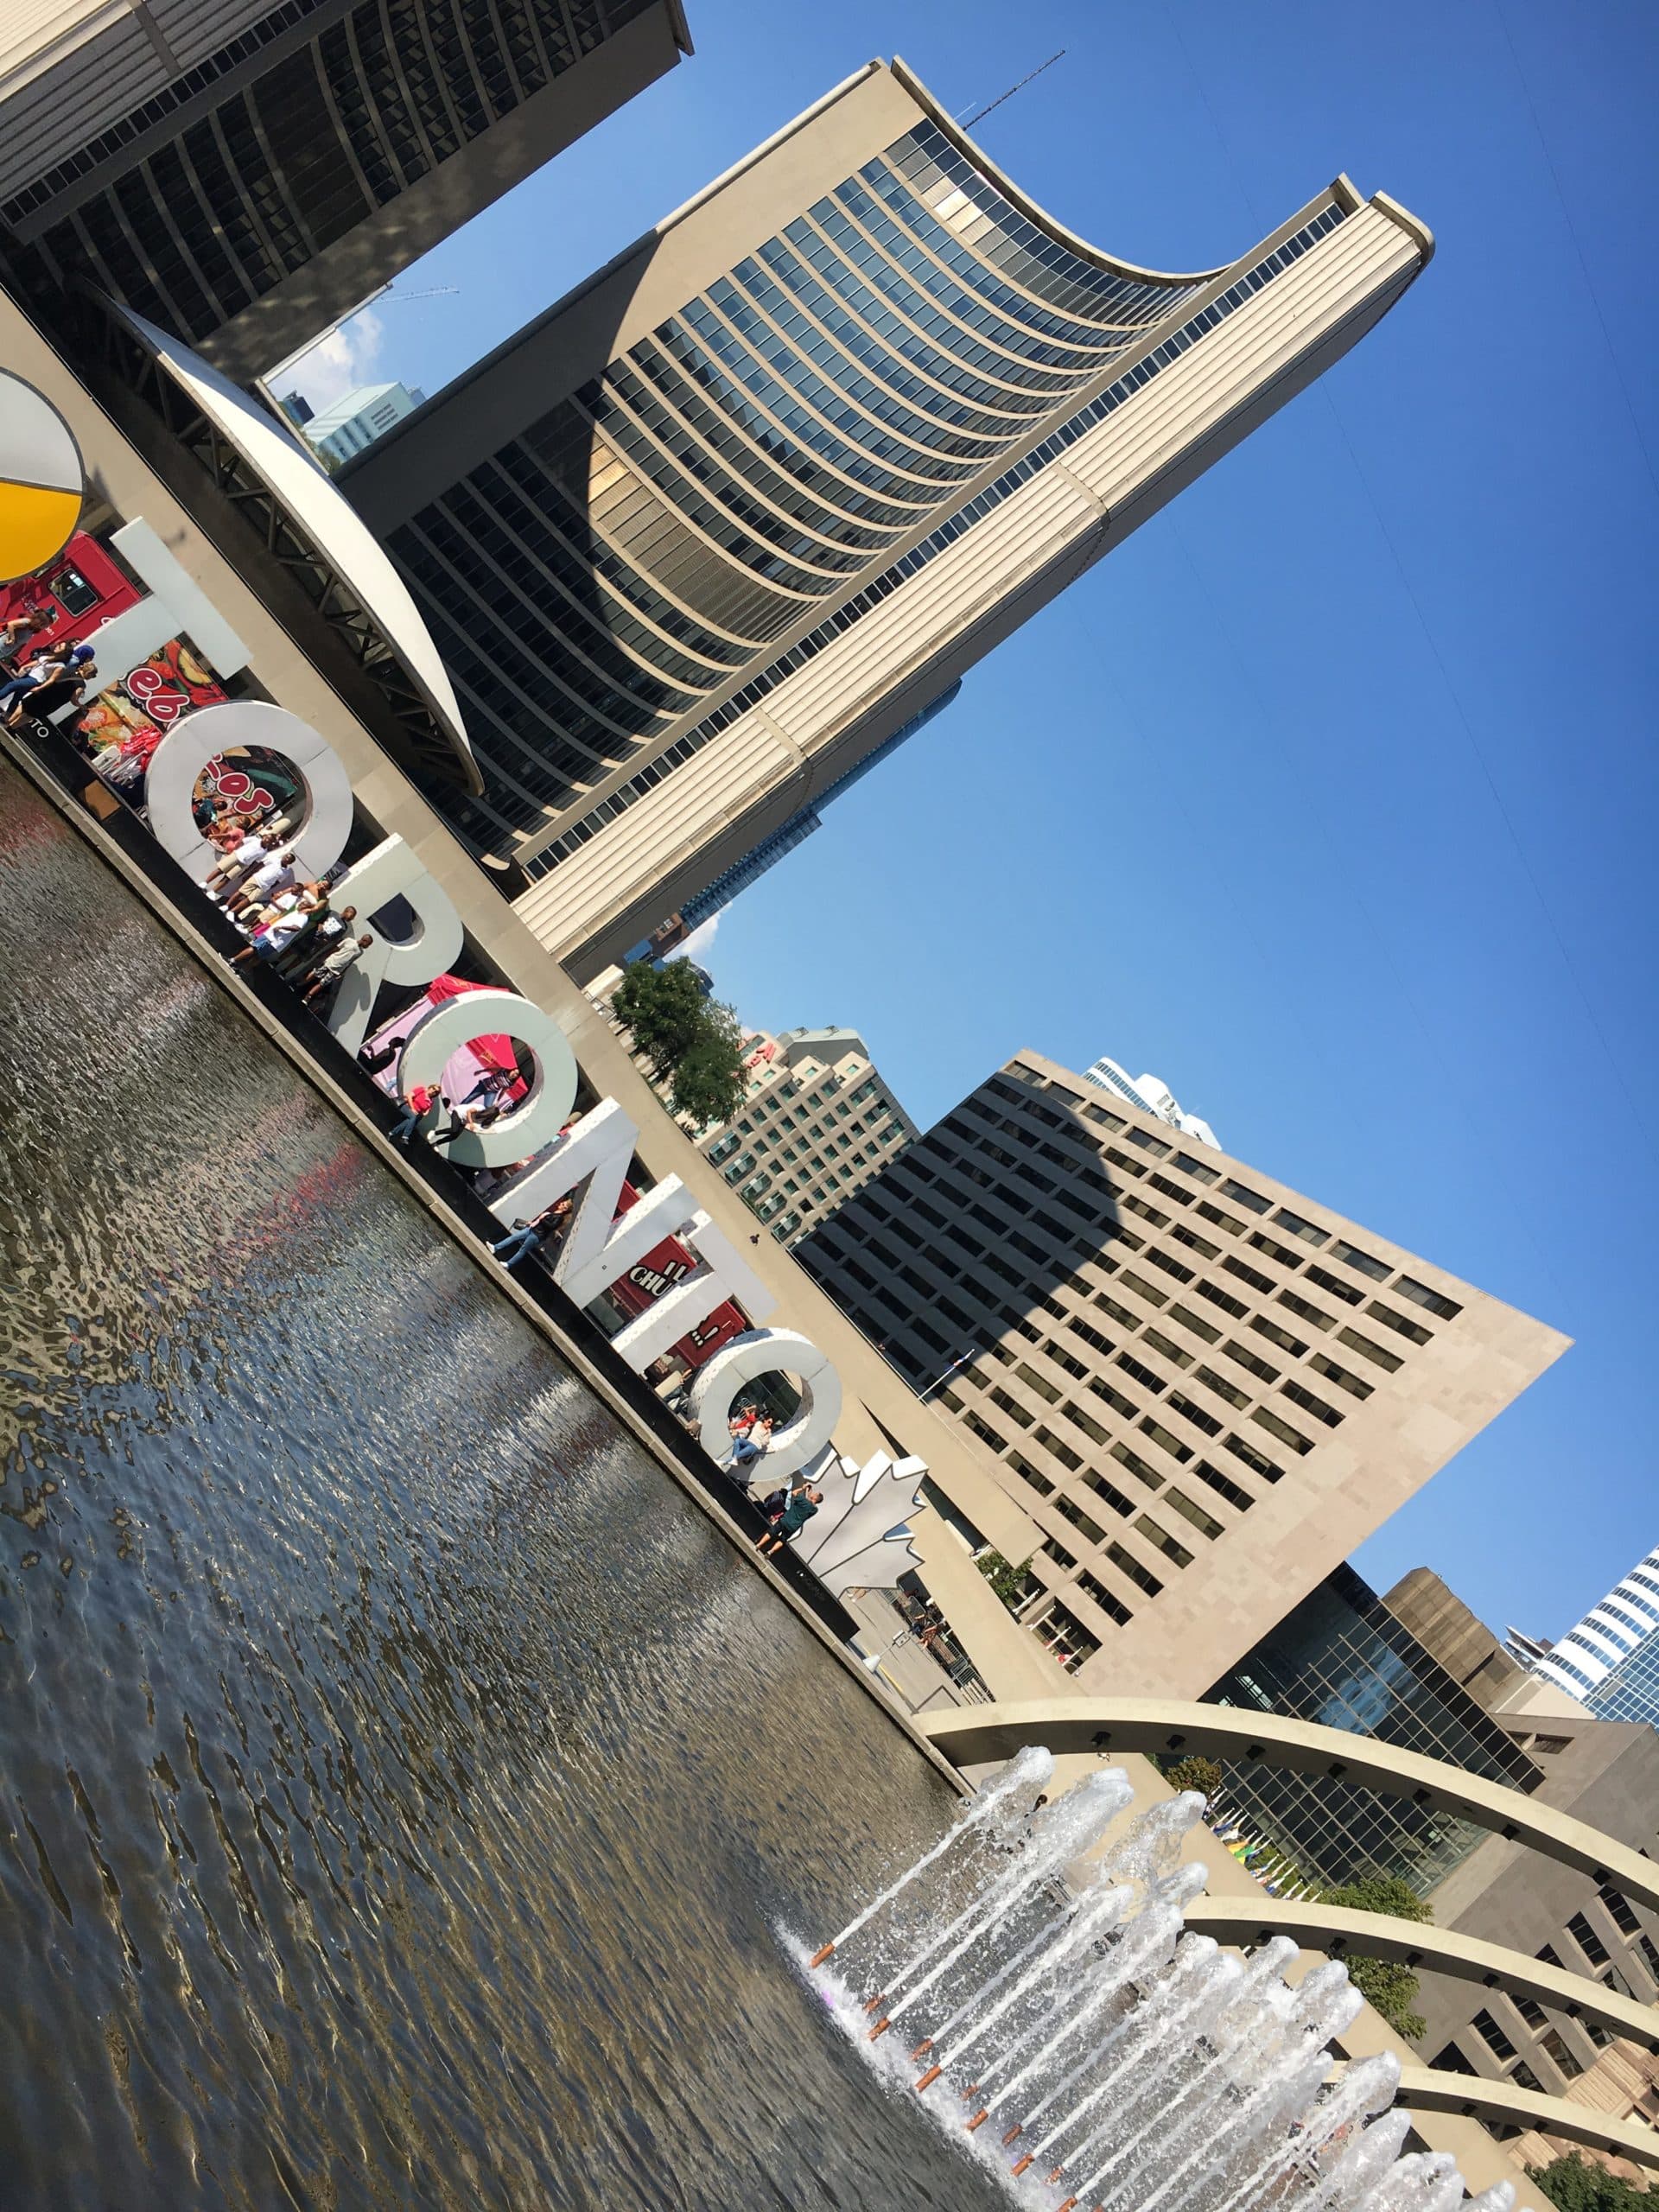 Ontario – Out in nature and the multi-cultural metropolis Toronto